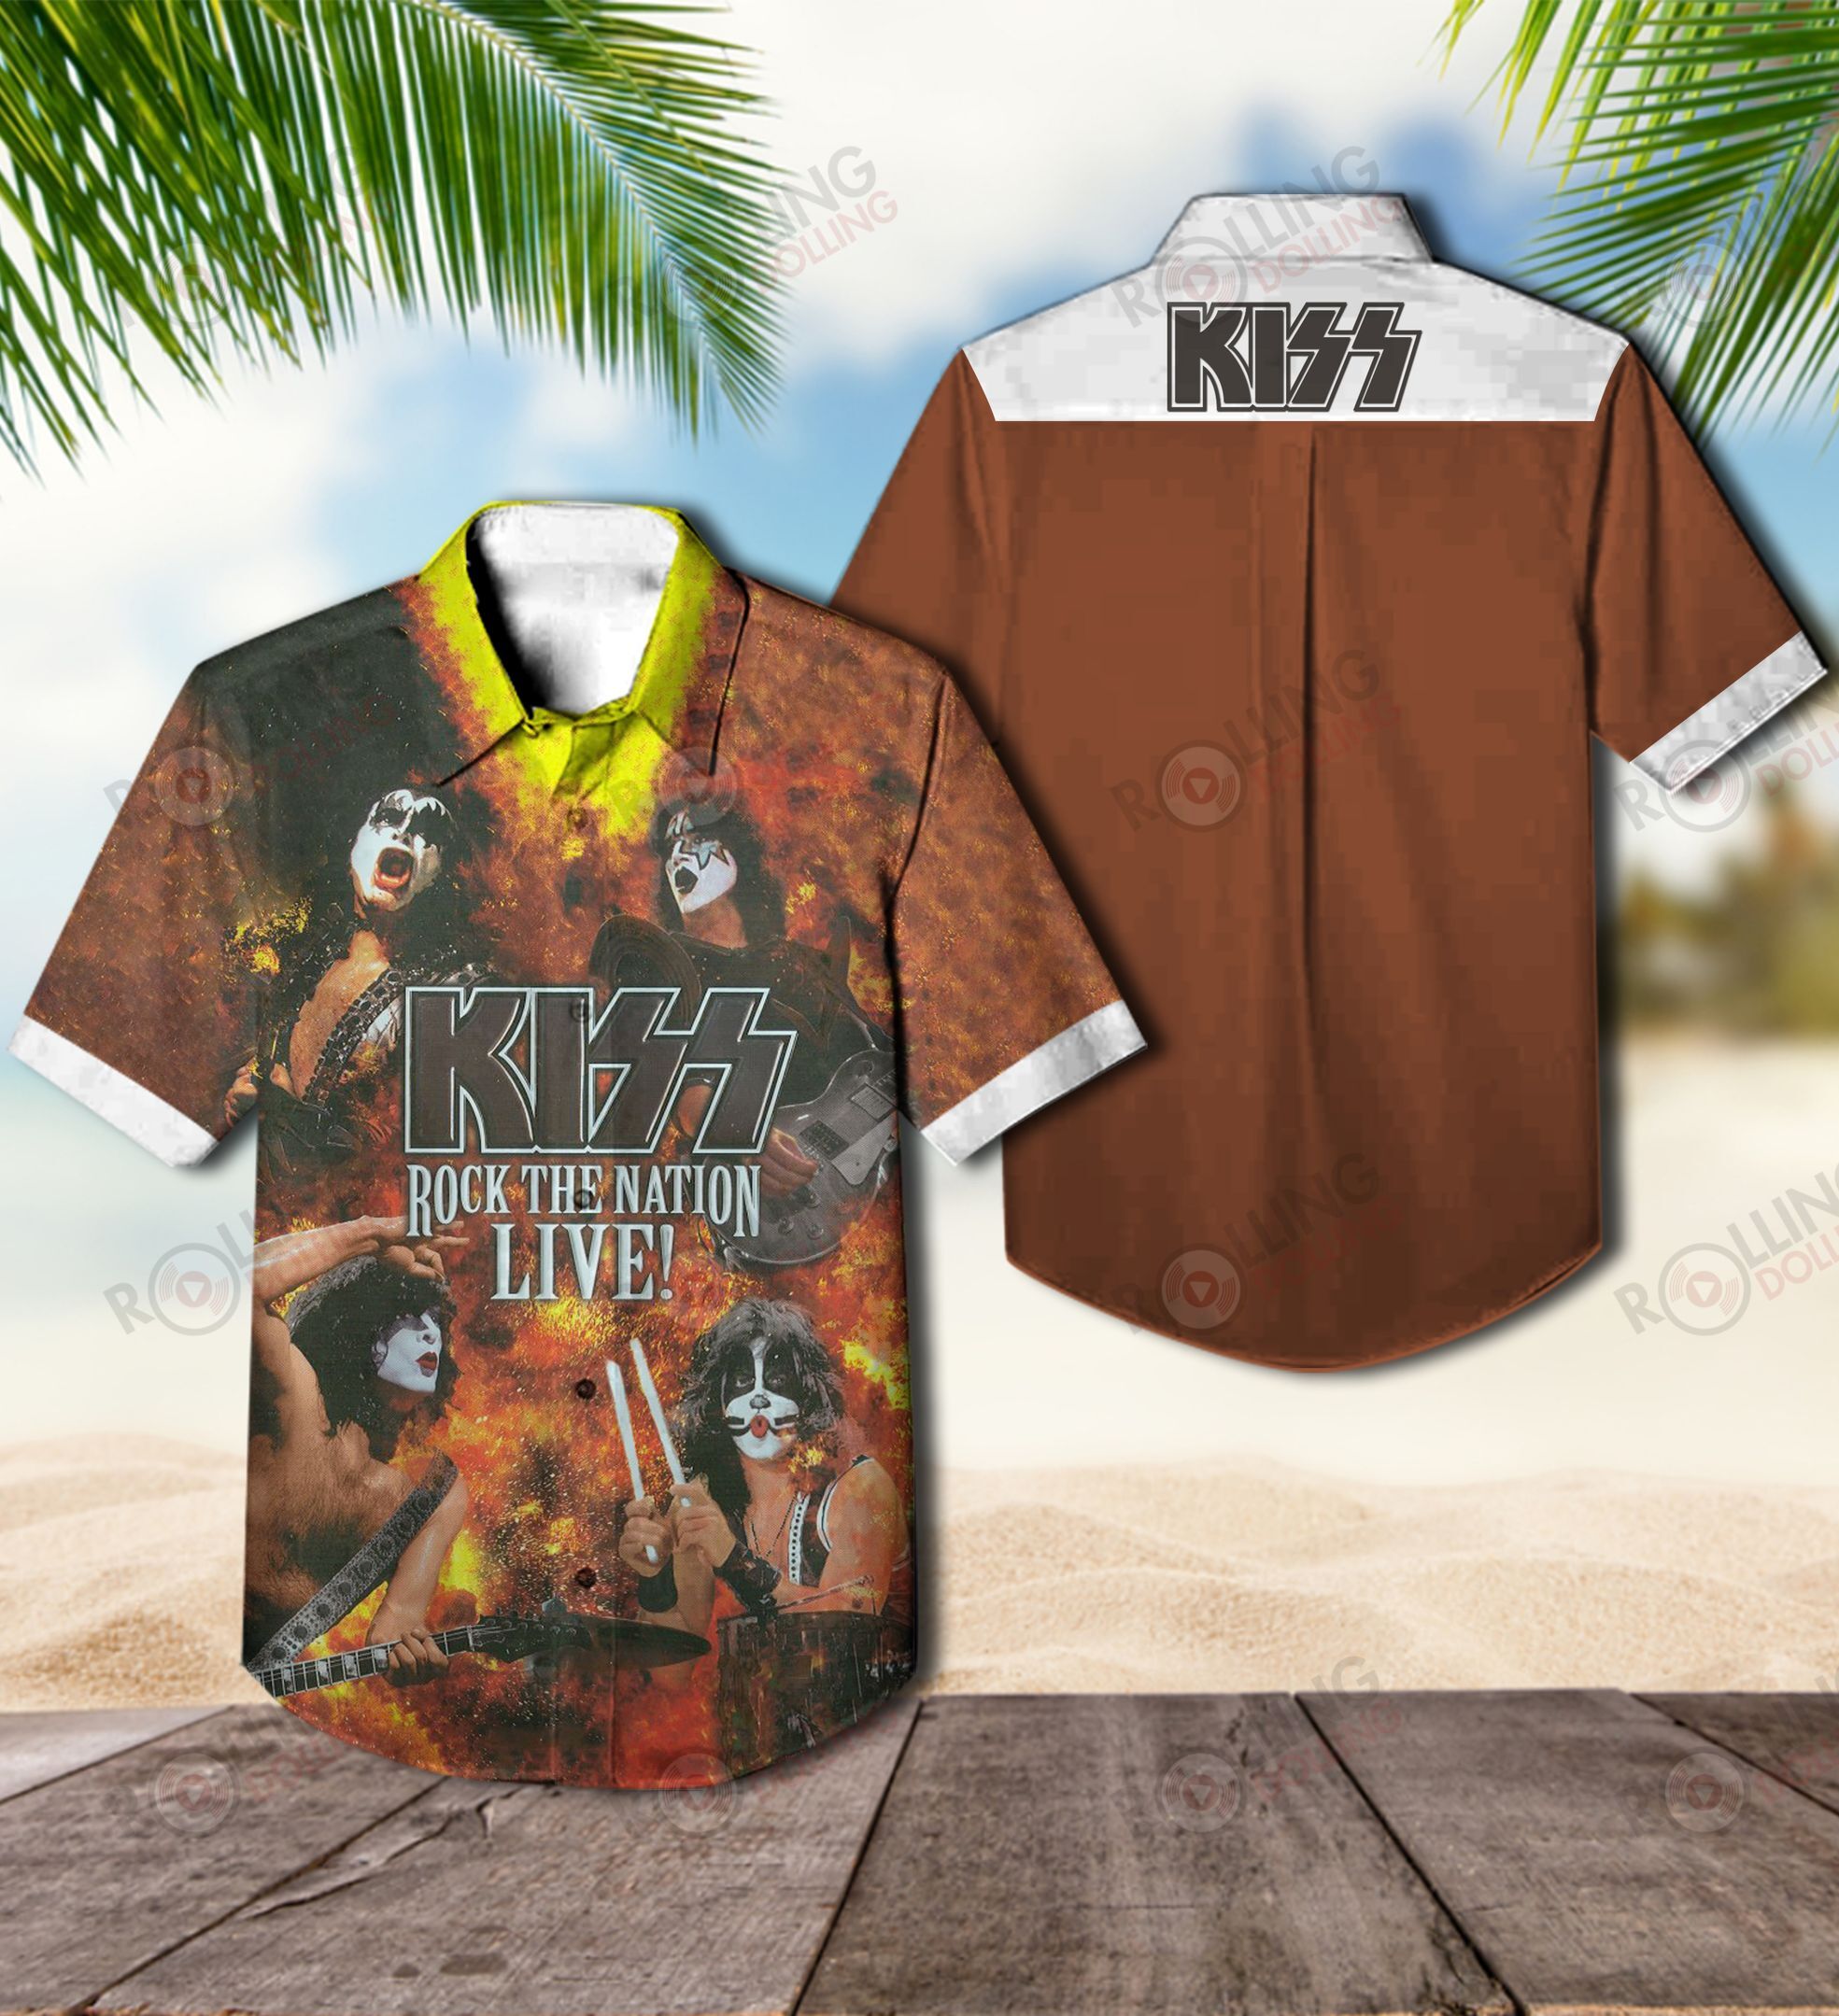 This would make a great gift for any fan who loves Hawaiian Shirt as well as Rock band 73